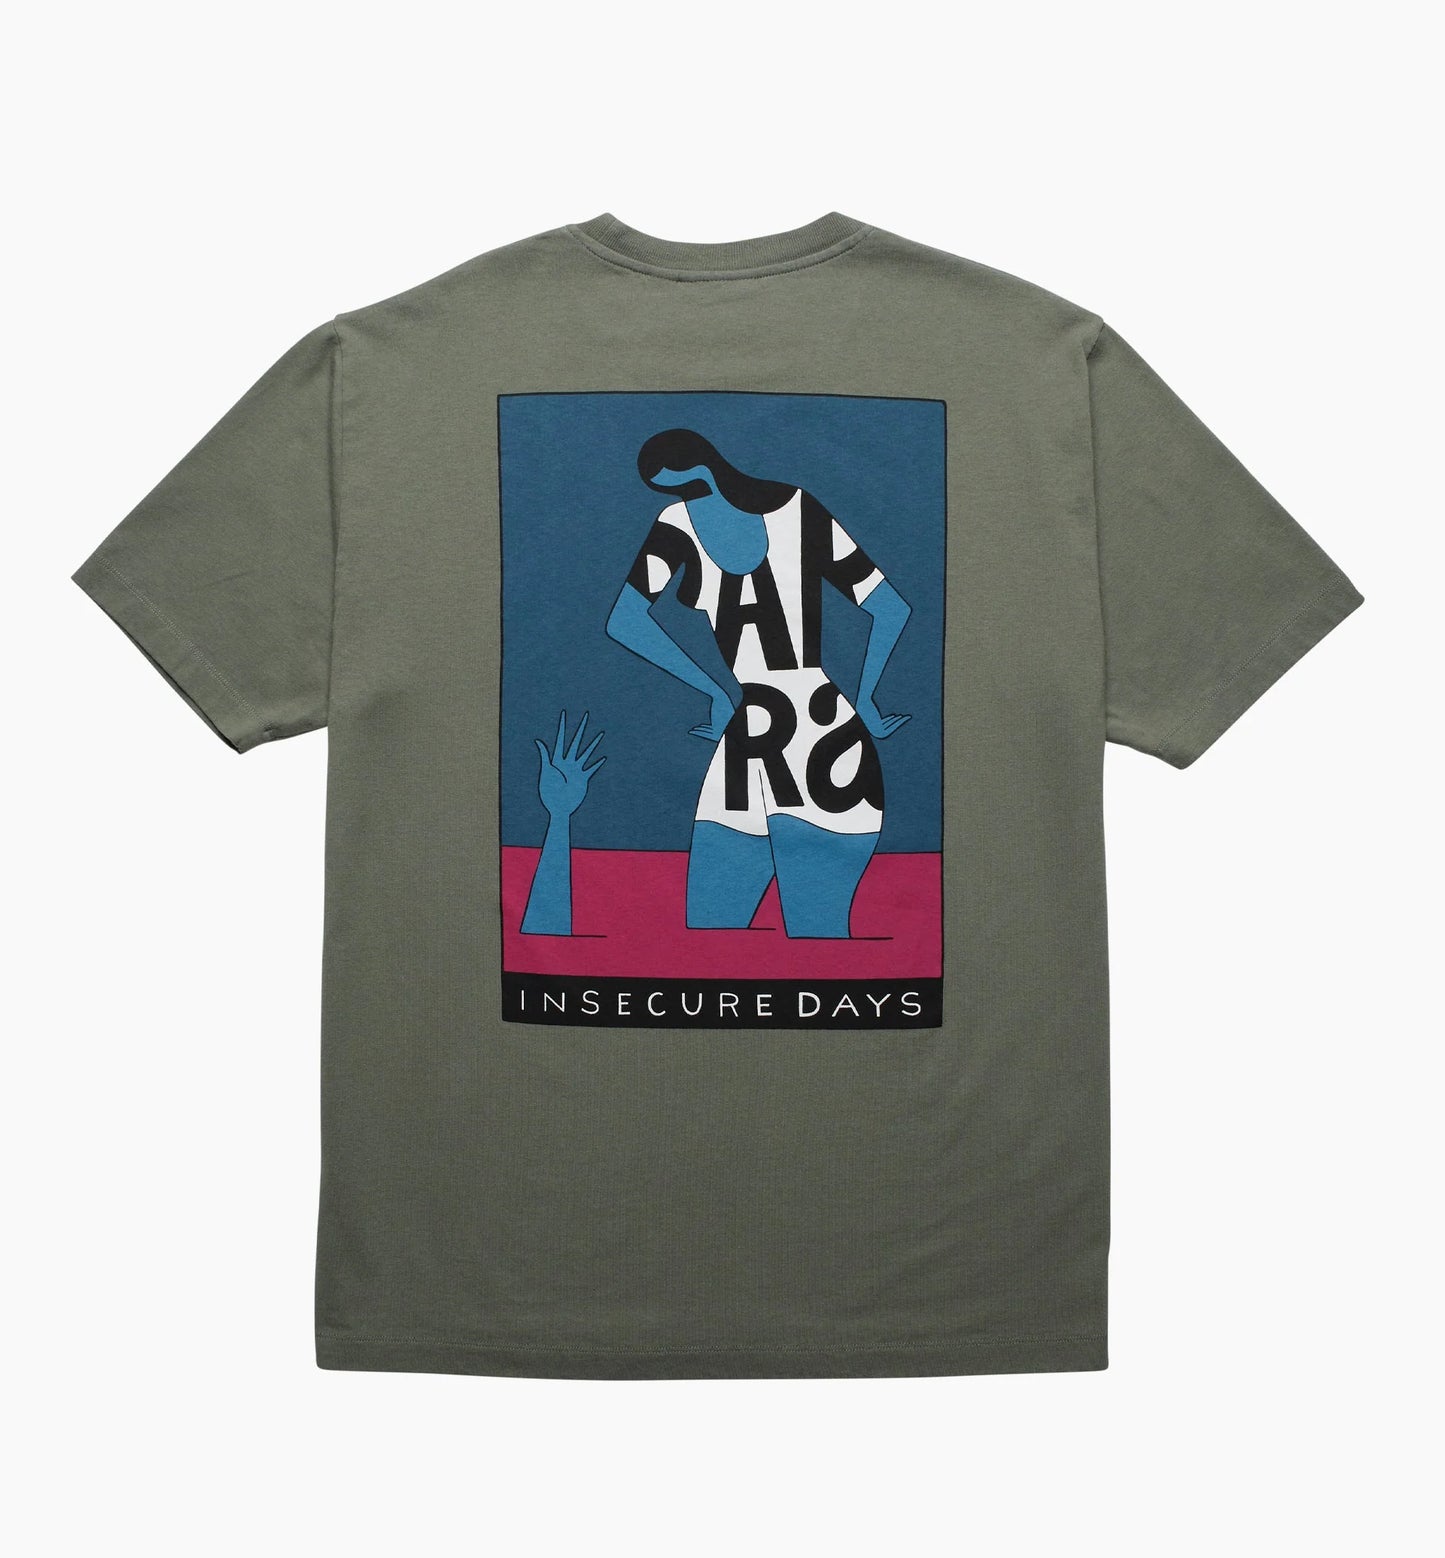 Parra "Insecure Days Tee" M - Greyish Green